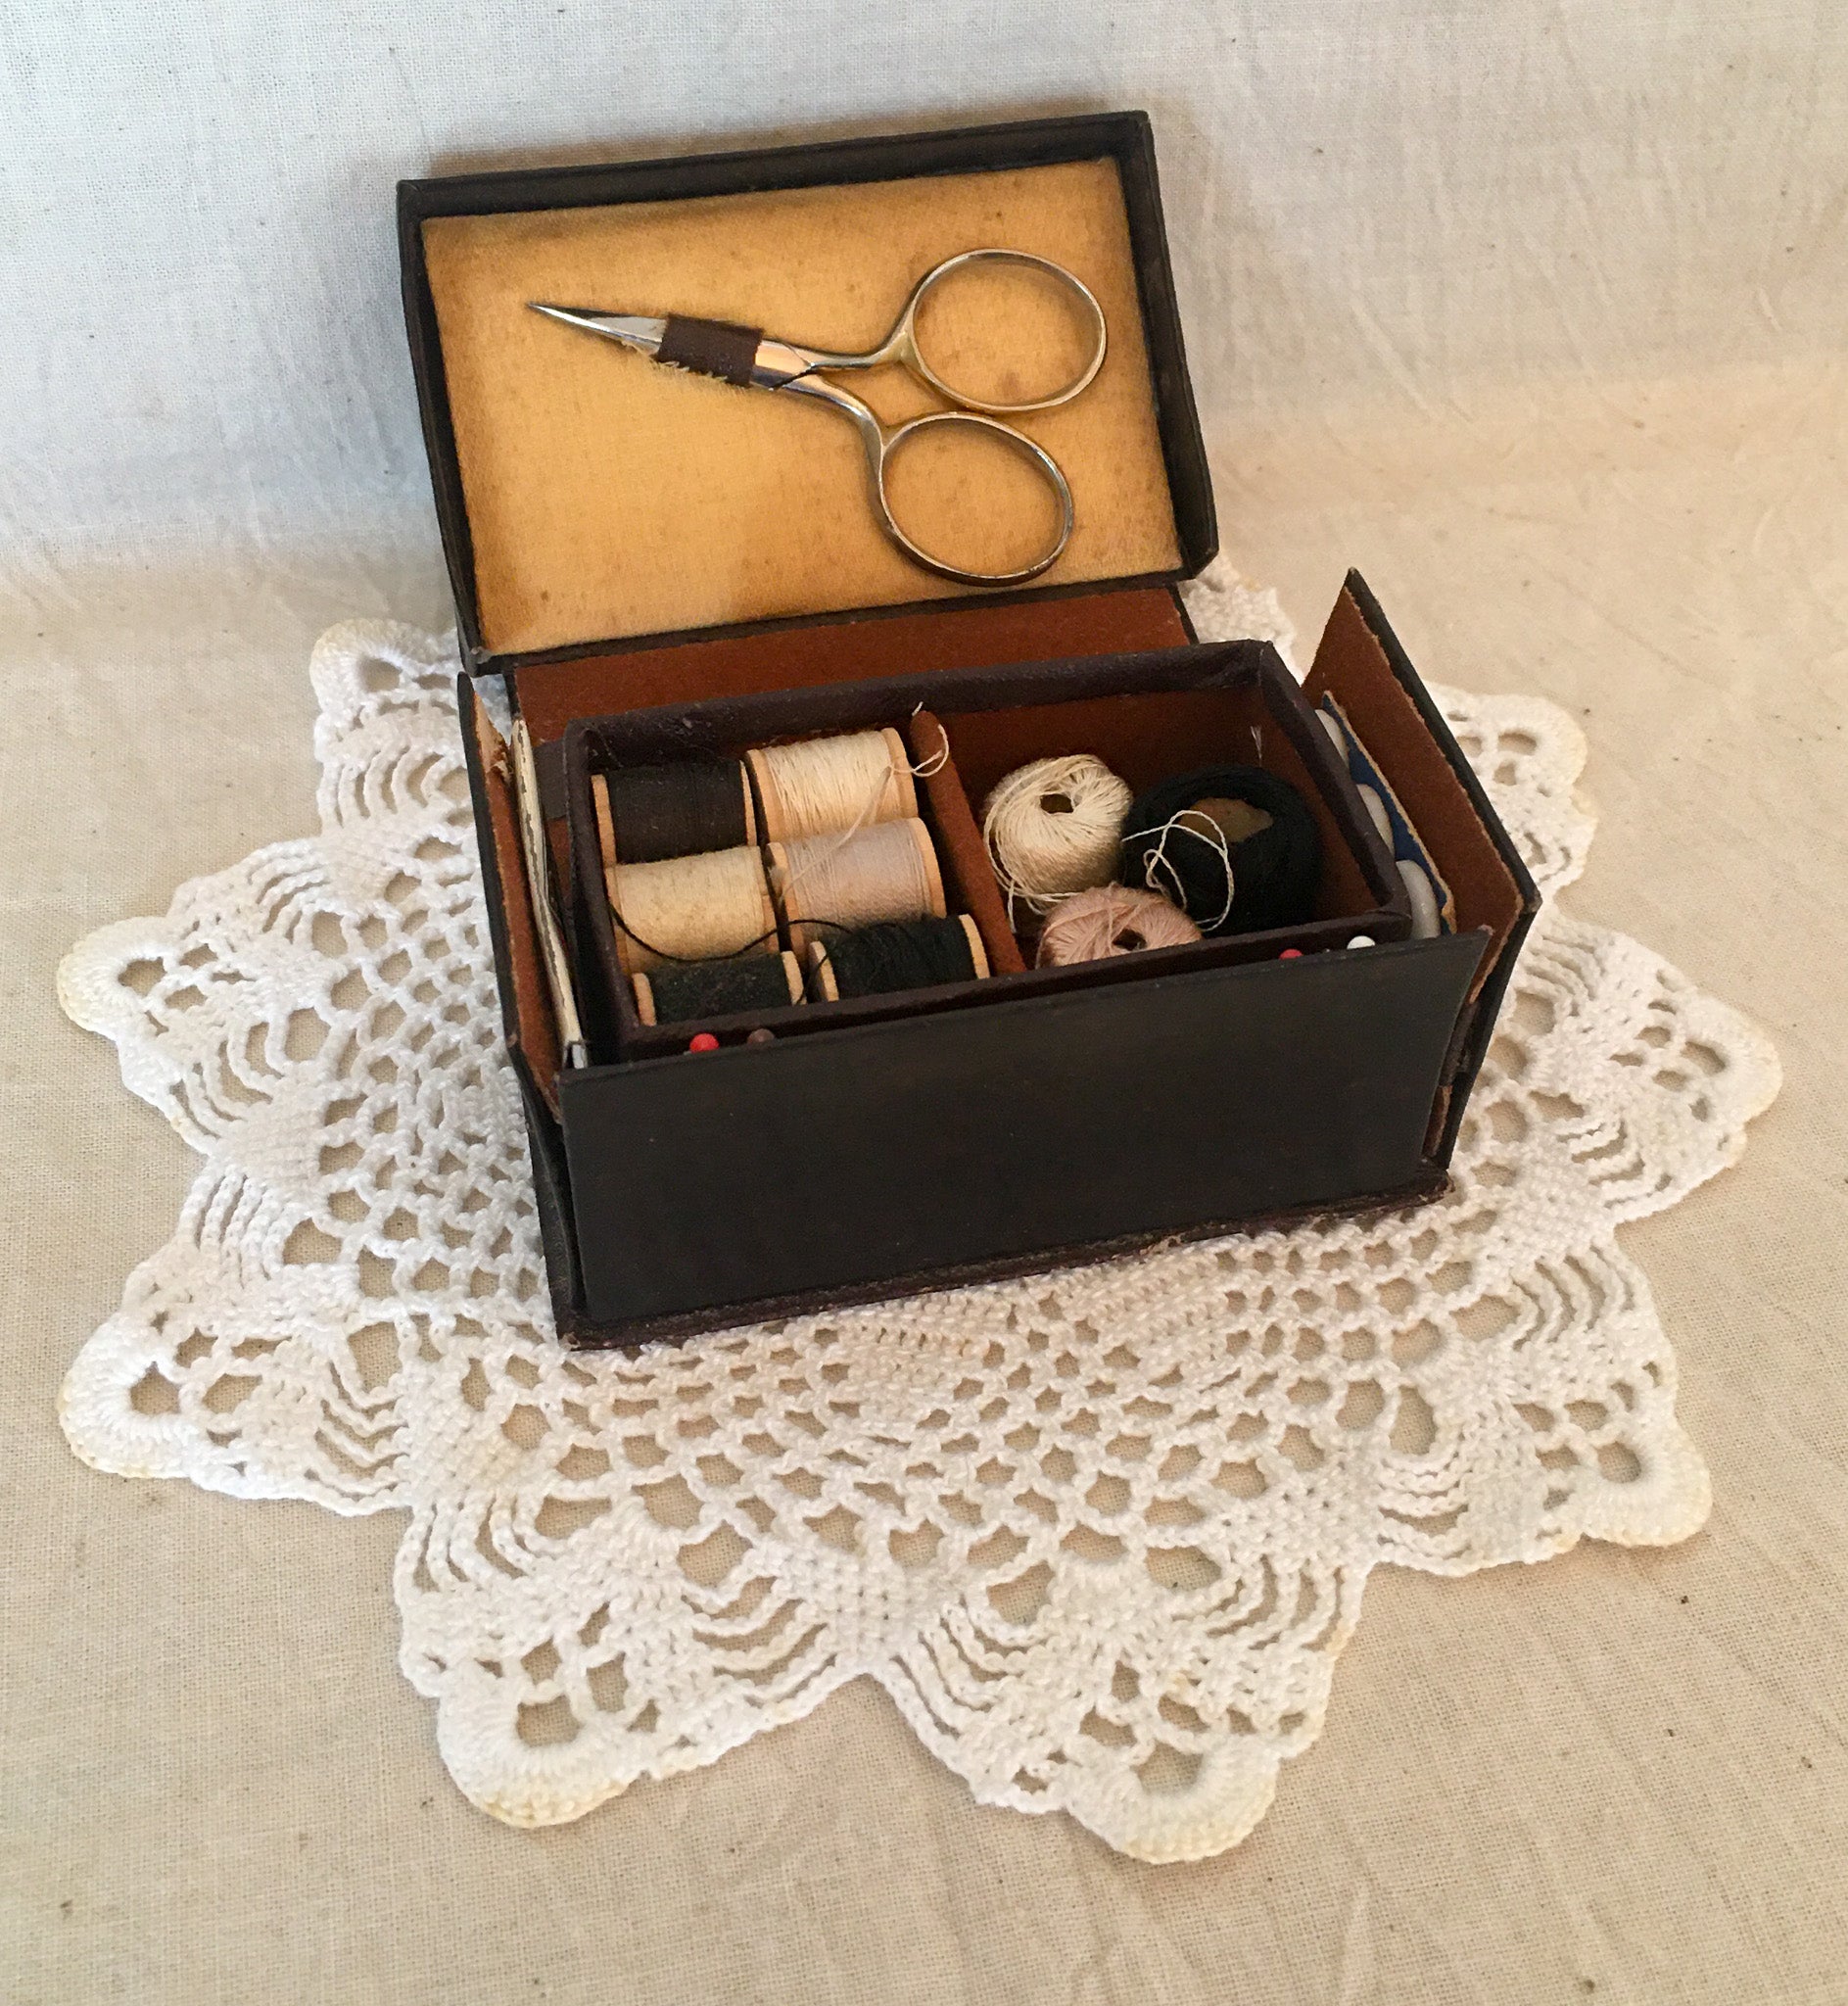 1920’s – 1930’s Sewing Kit in Folding Box with Contents, Made in Germany